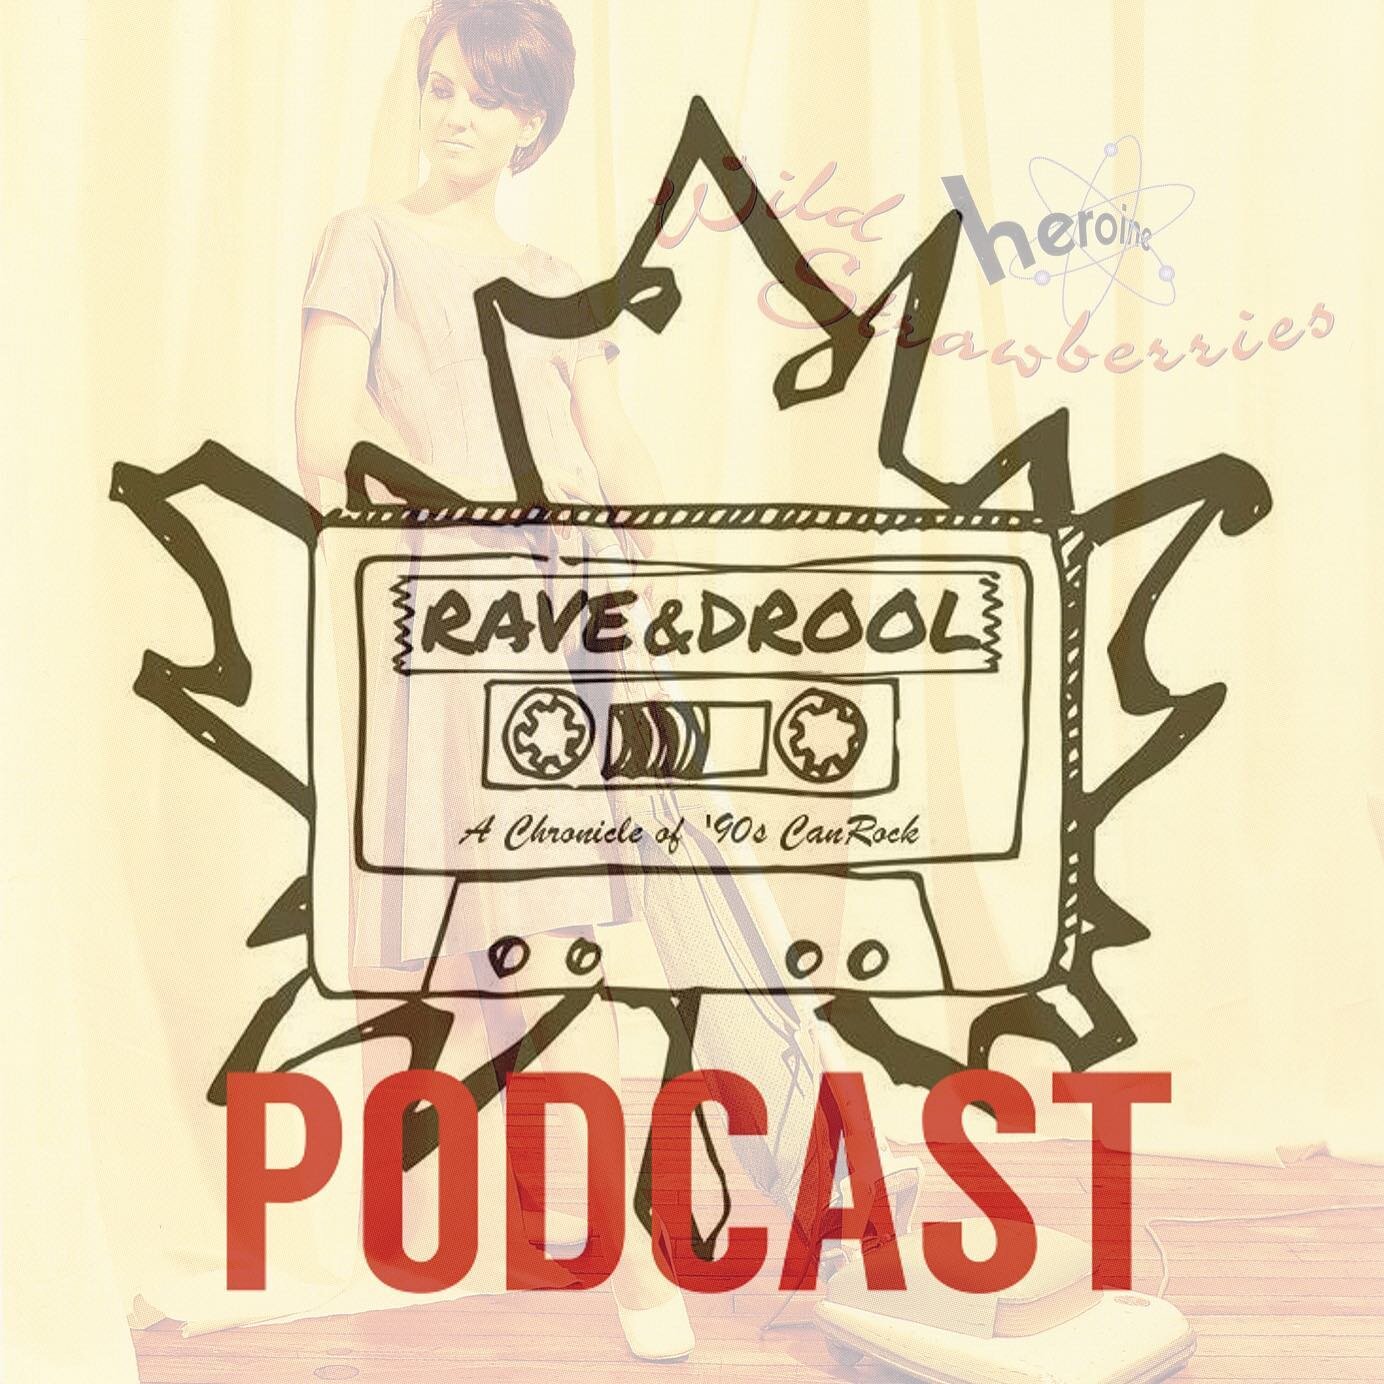 Check out our interview with Tyler at Rave and Drool now live on #applepodcasts #stitcher and #spotify!